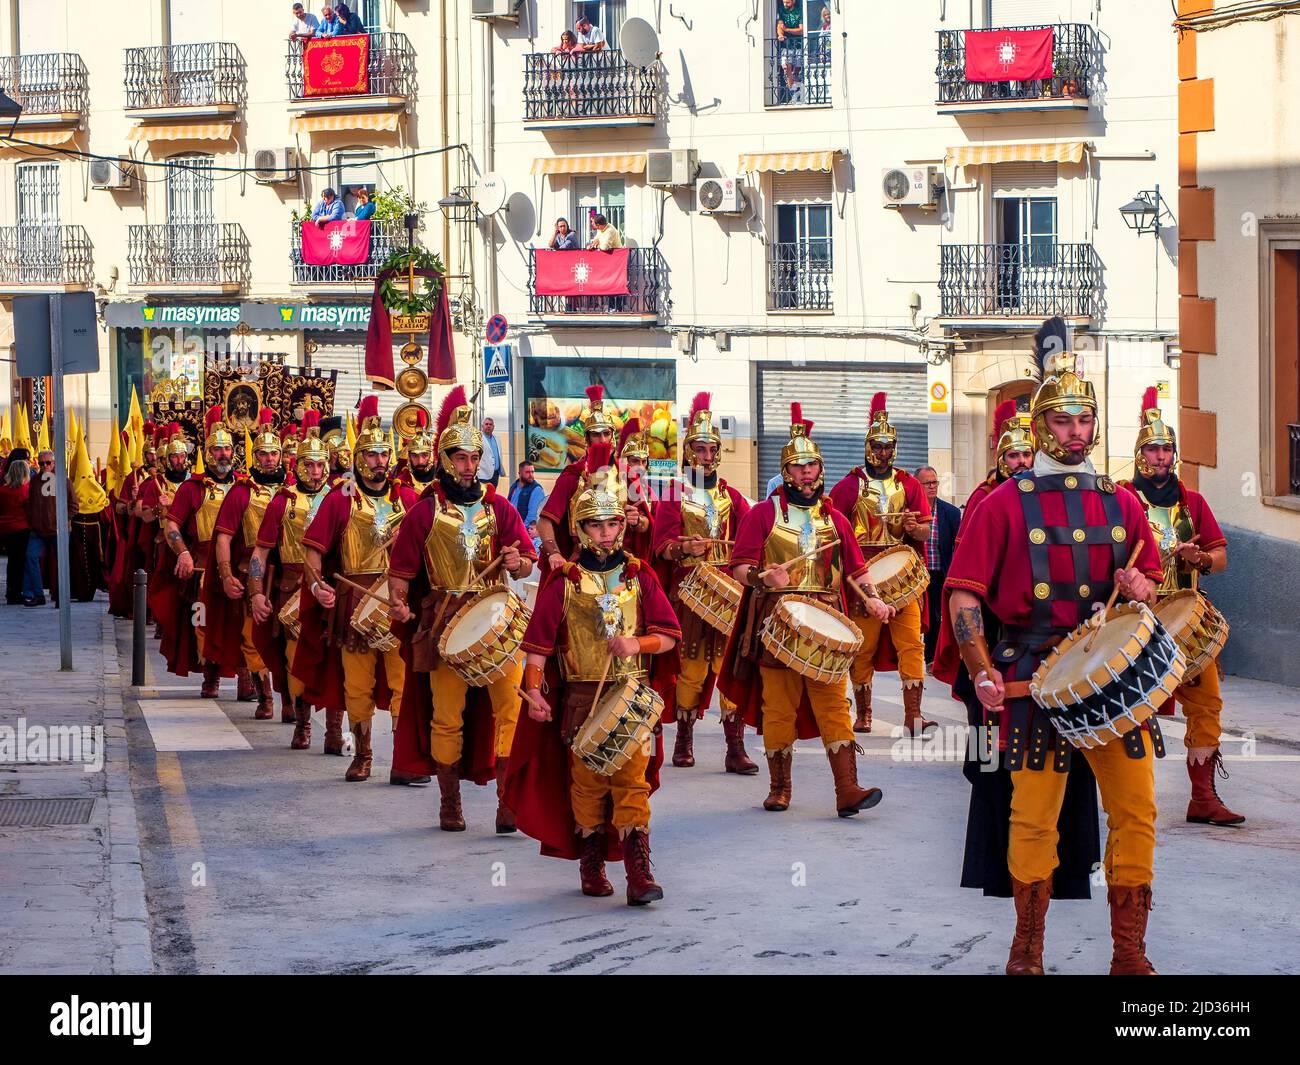 Drum and trumpet band parading through the streets of Ubeda during the celebration of the traditional Semana Santa (Holy Week). Stock Photo